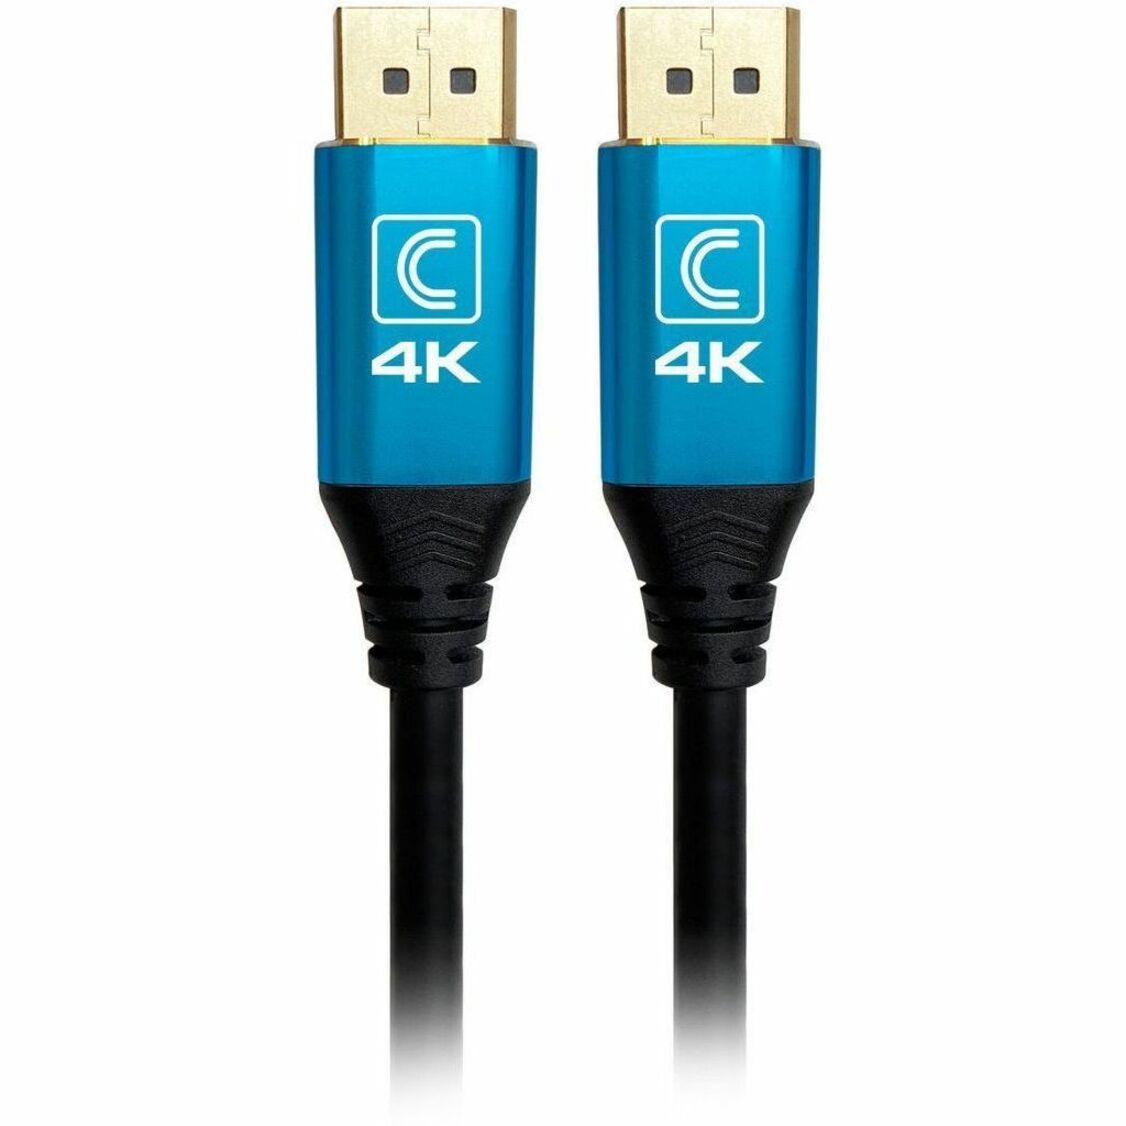 Comprehensive DP-4K-3SP Pro AV/IT Specialist Series 4K Displayport 1.2a Cable 3ft, Durable, Strain Relief, Locking Latch, 21.6 Gbit/s Data Transfer Rate